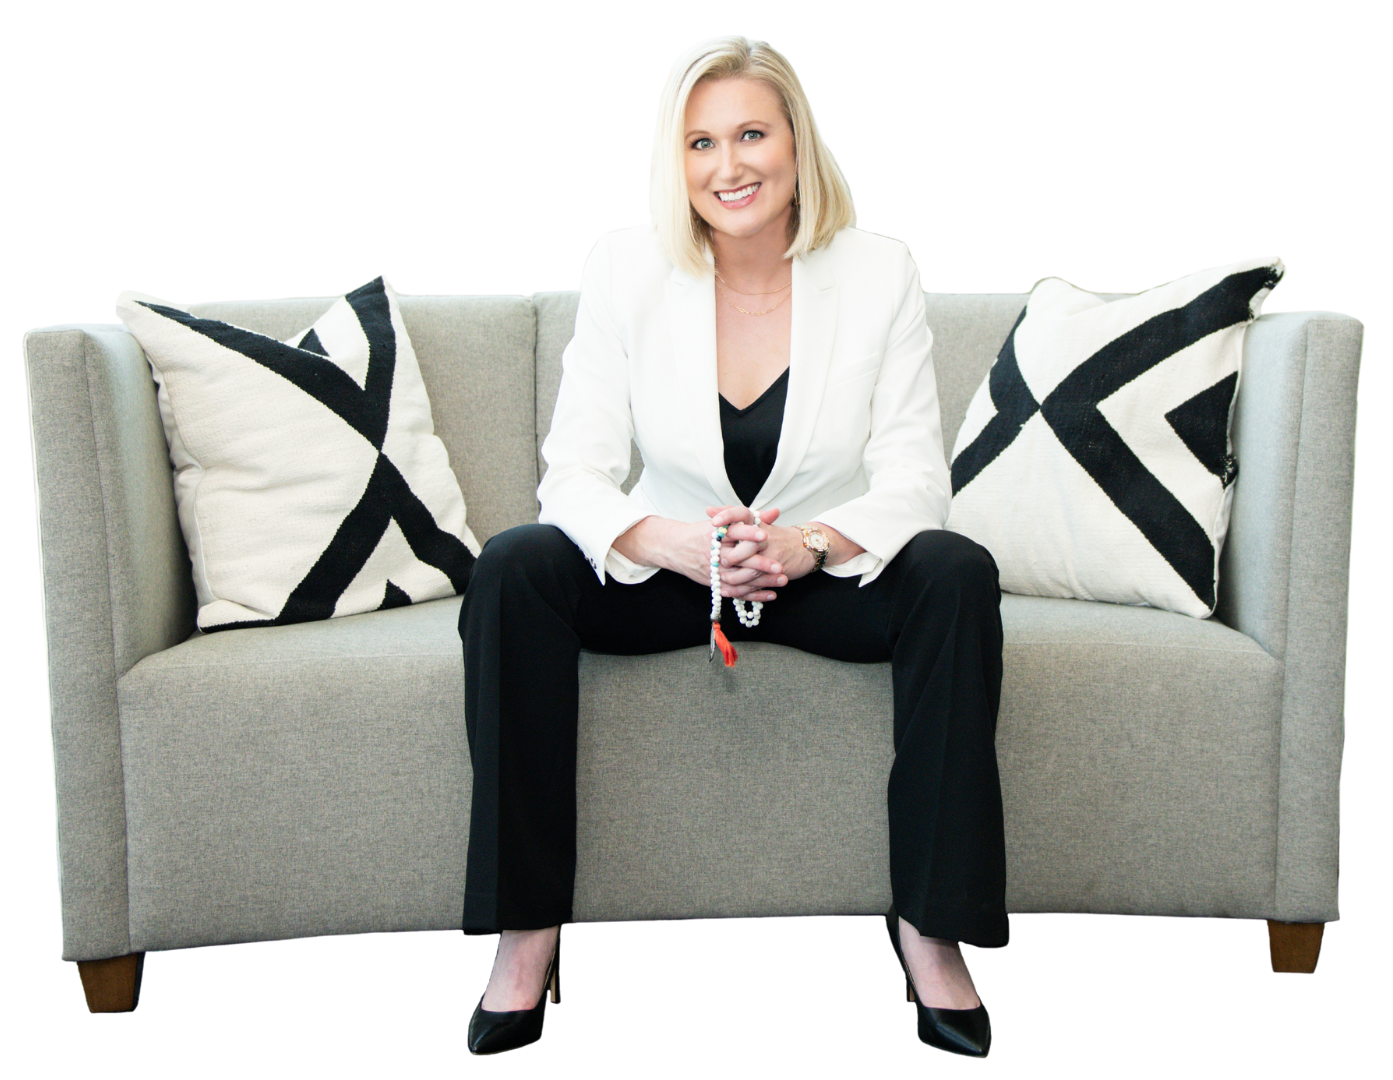 Katherine M. Sauer wearing a white blazer and holding a yoga mala, sitting on a couch